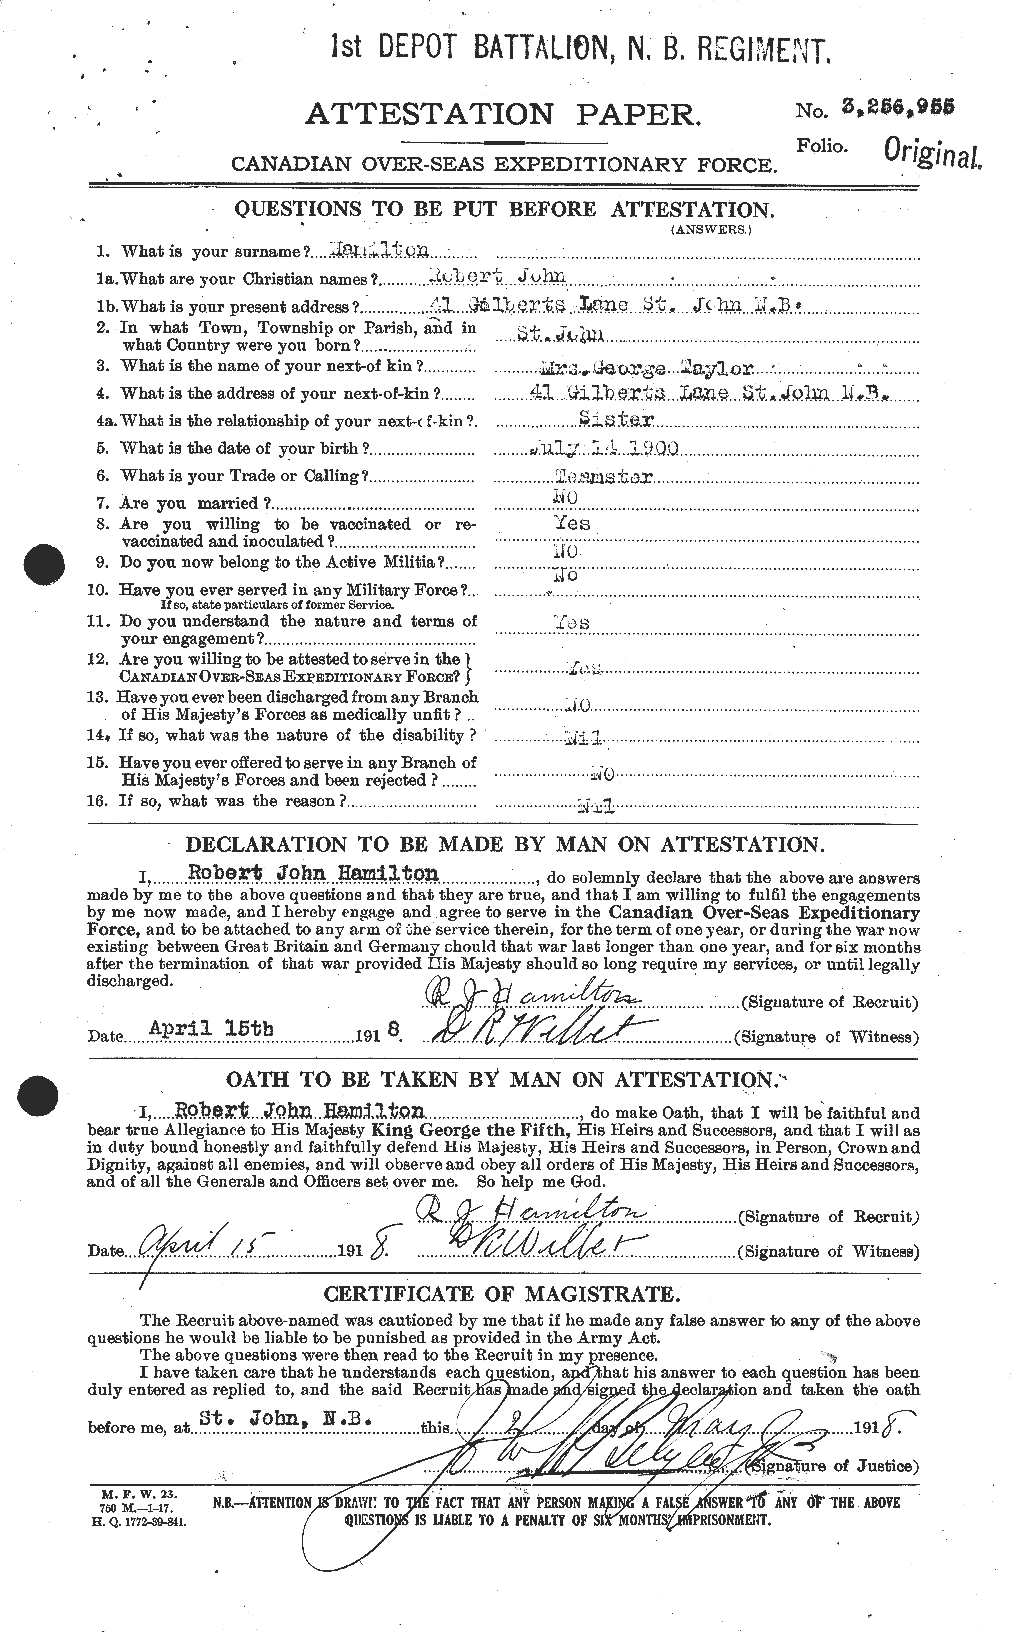 Personnel Records of the First World War - CEF 373262a